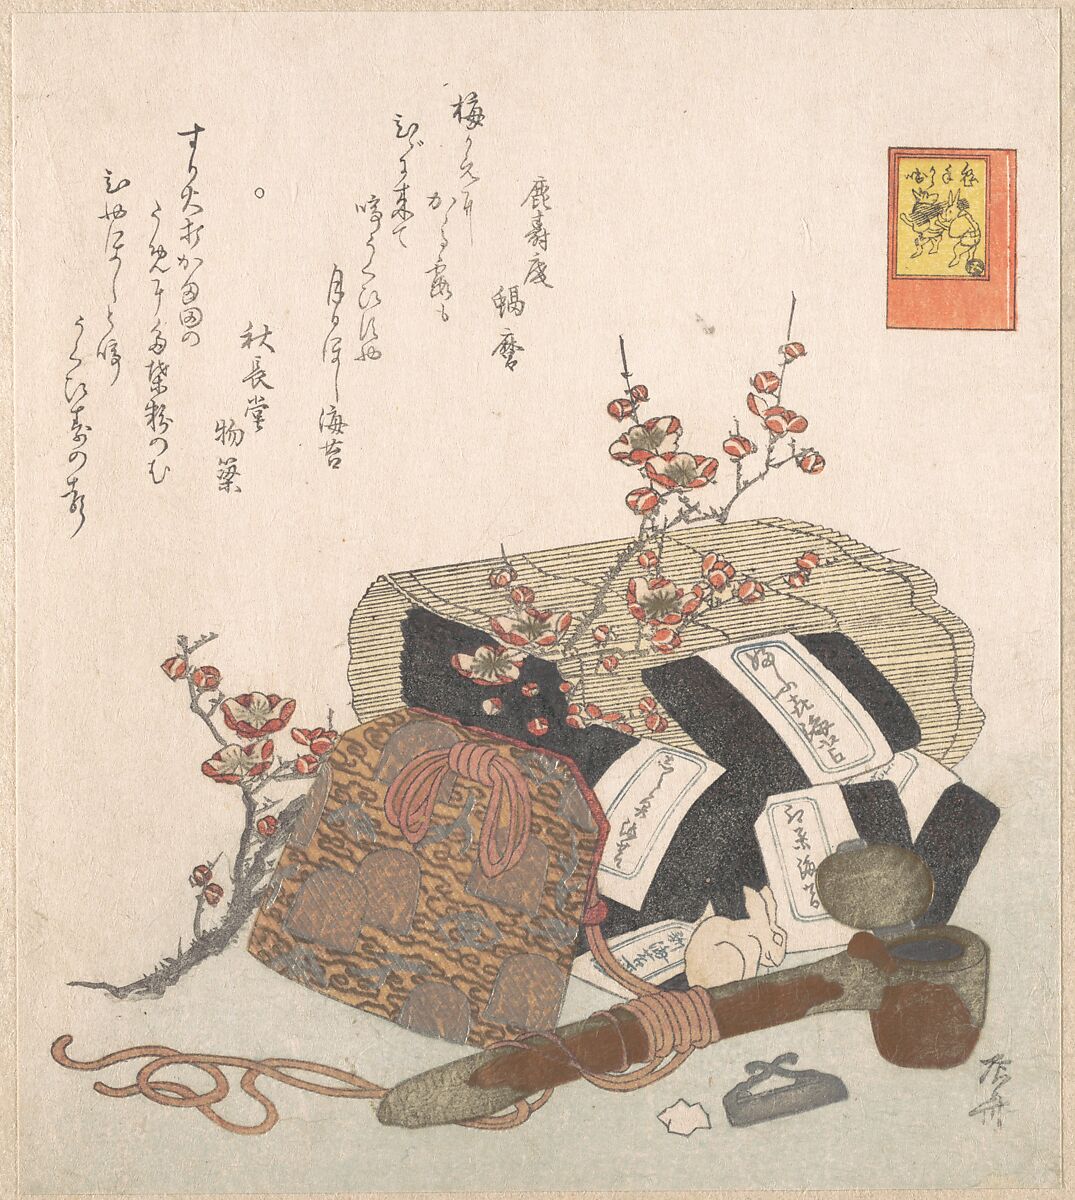 Refined Lavers (A Kind of Sea Weed) and a Handy Writing Outfit with Pouch, Ryūryūkyo Shinsai (Japanese, active ca. 1799–1823), Woodblock print (surimono); ink and color on paper, Japan 